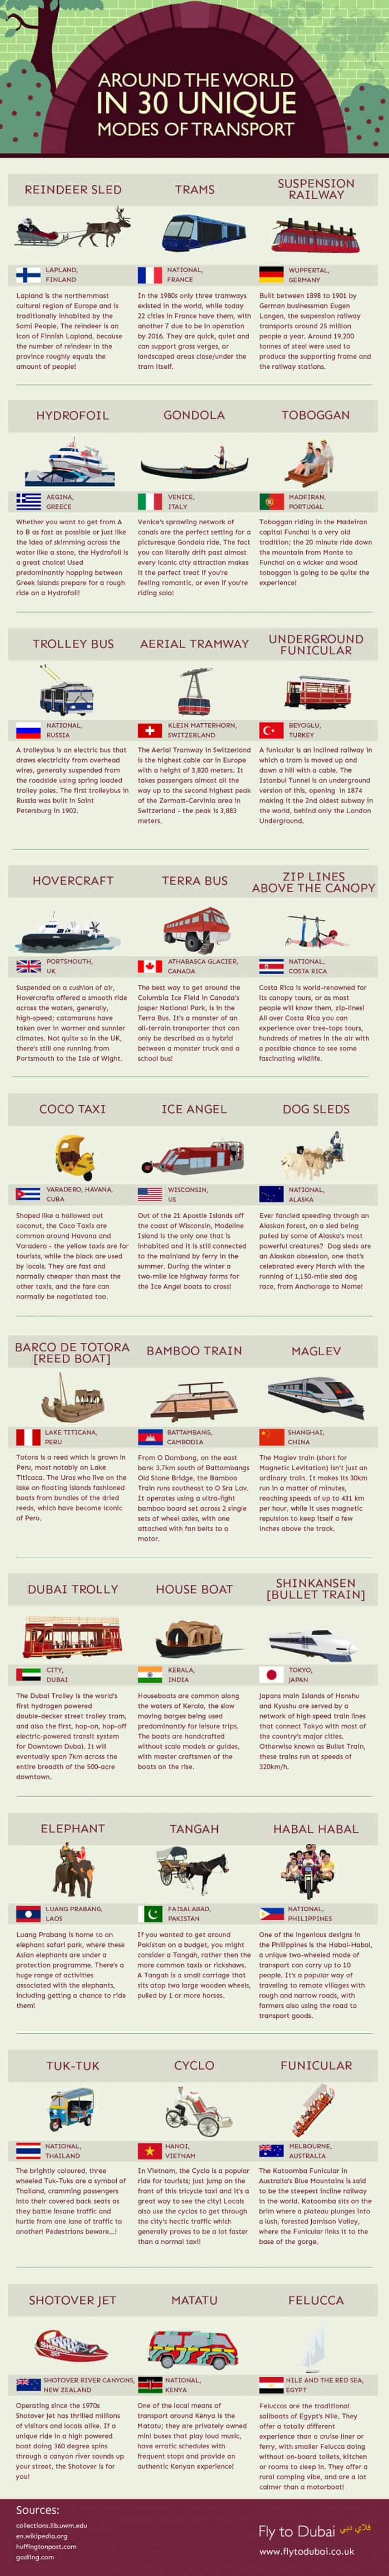 Transport from around the world